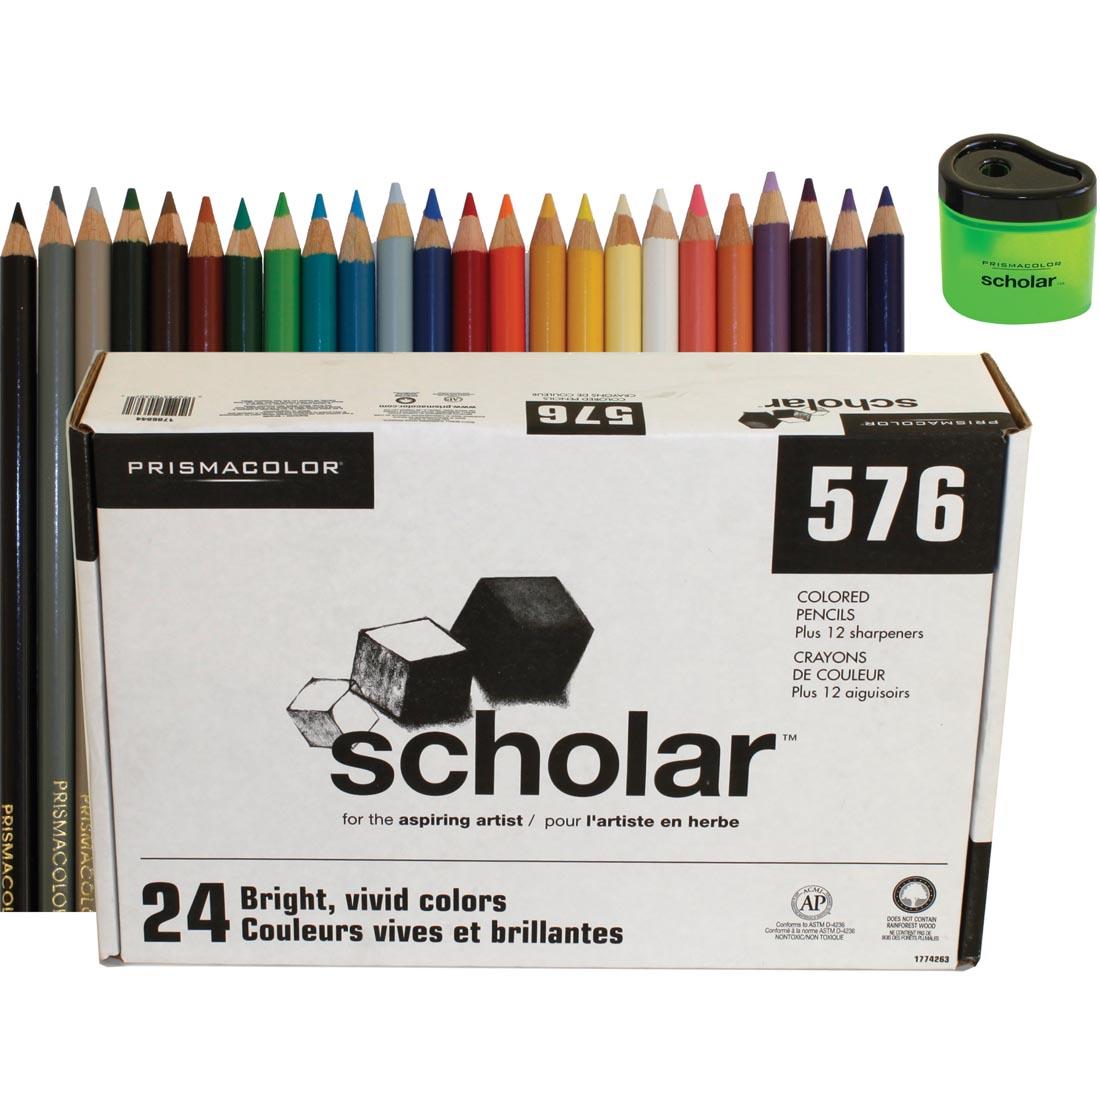 Prismacolor Scholar Colored Pencils 576-Count Set Box shown with the 24 colors of pencils and a pencil sharpener